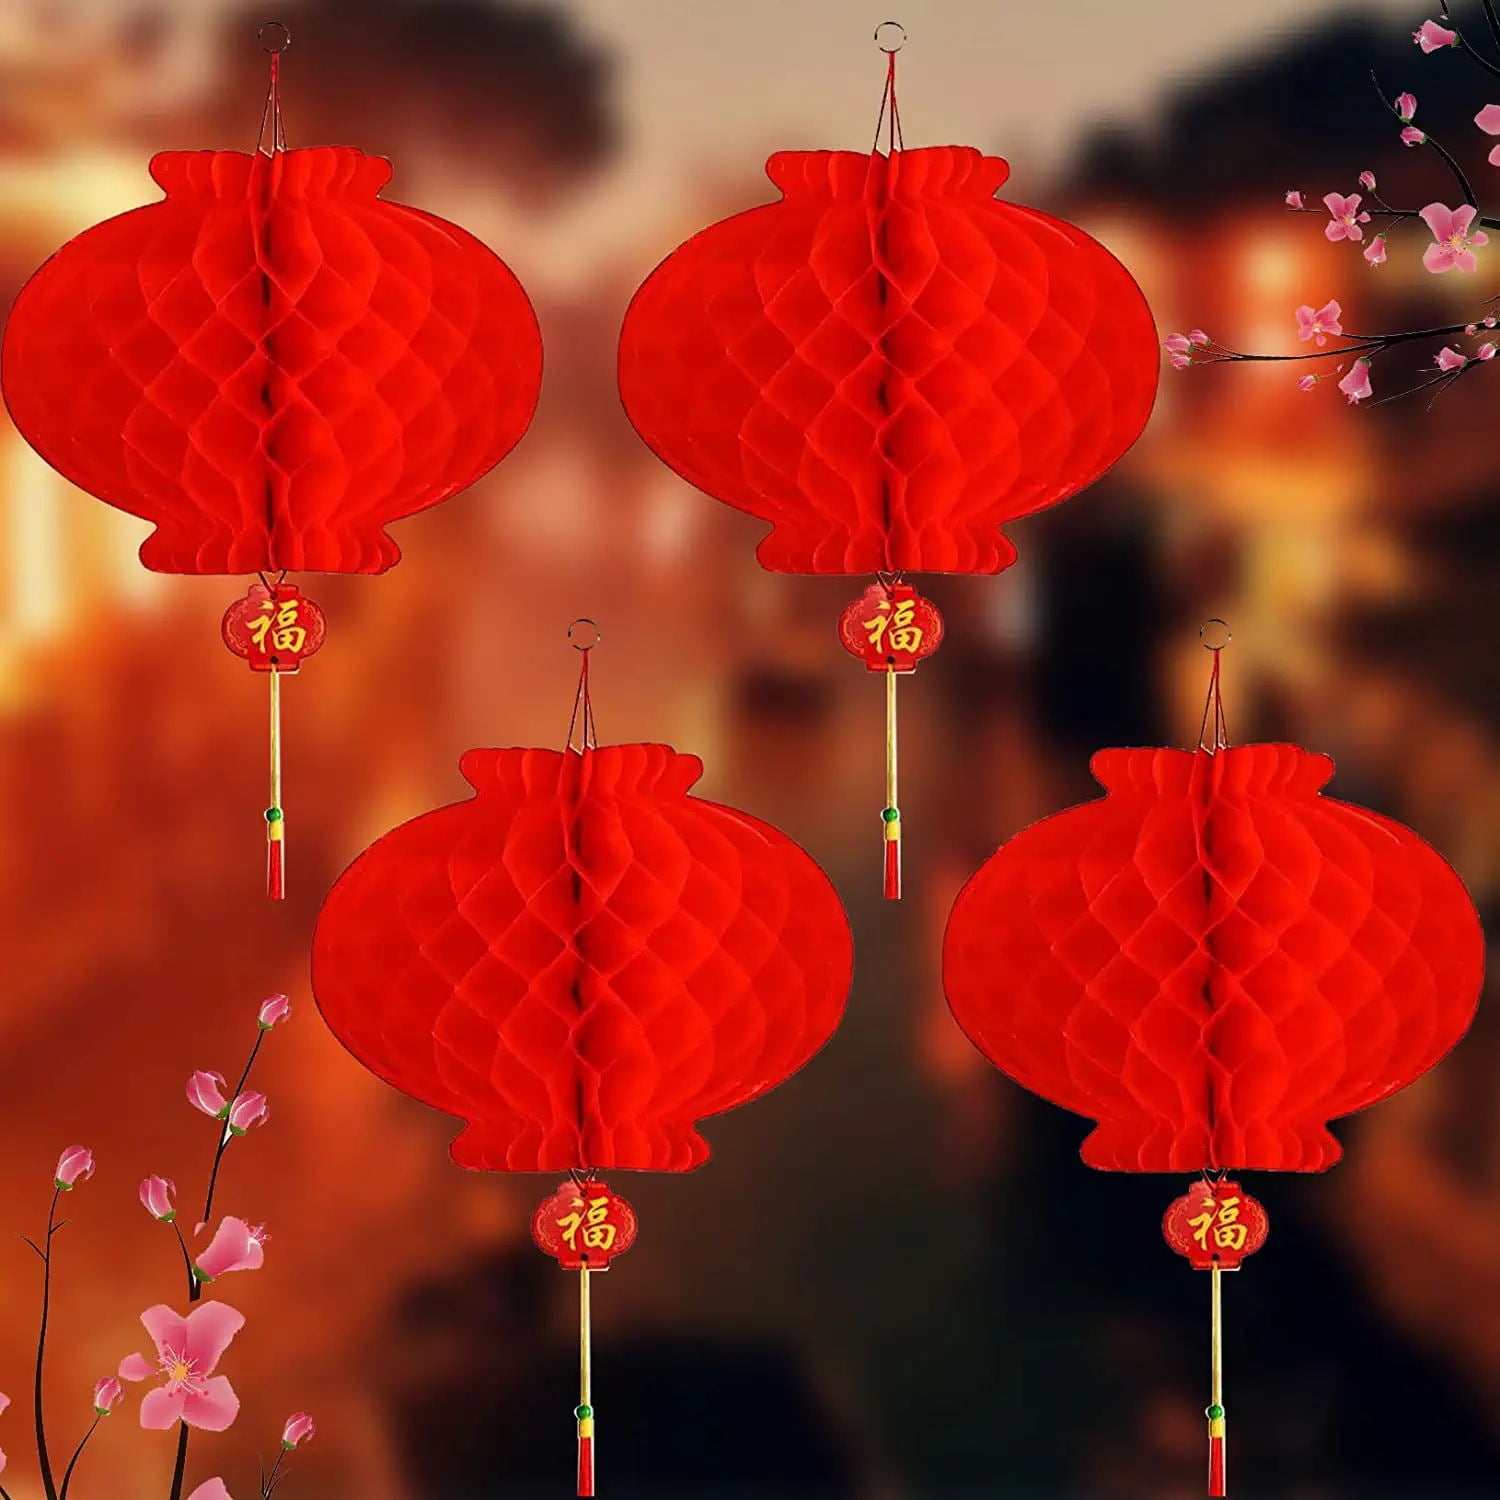 9 Red Paper Hand Fans for Weddings, Premium Paper Stock (10 Pack) on Sale  Now!, Chinese Lanterns